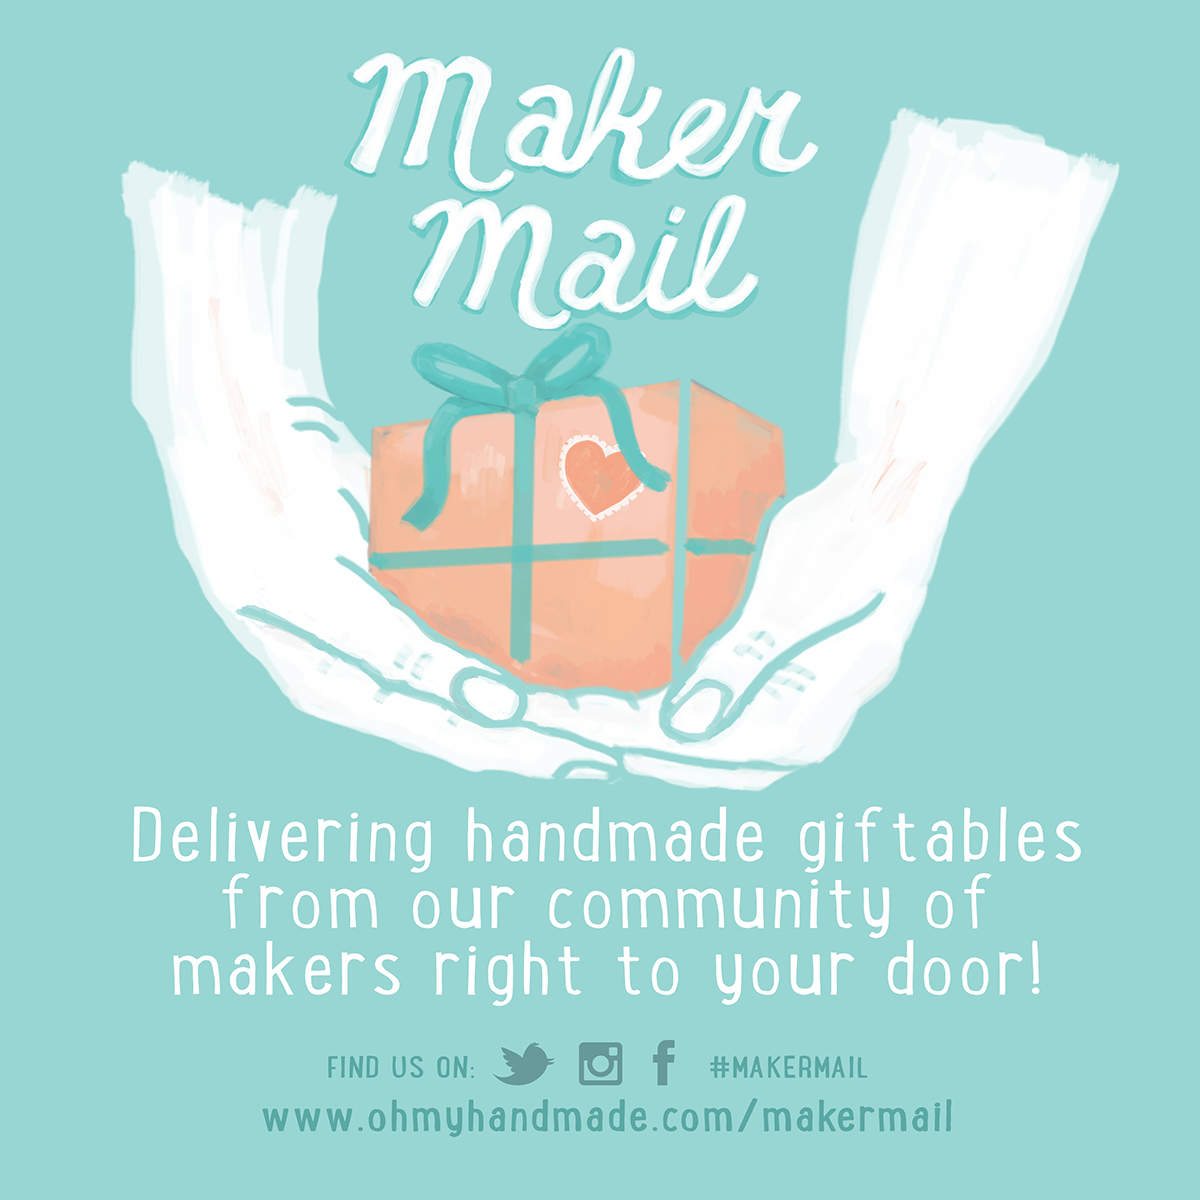 Maker Mail by OMHG